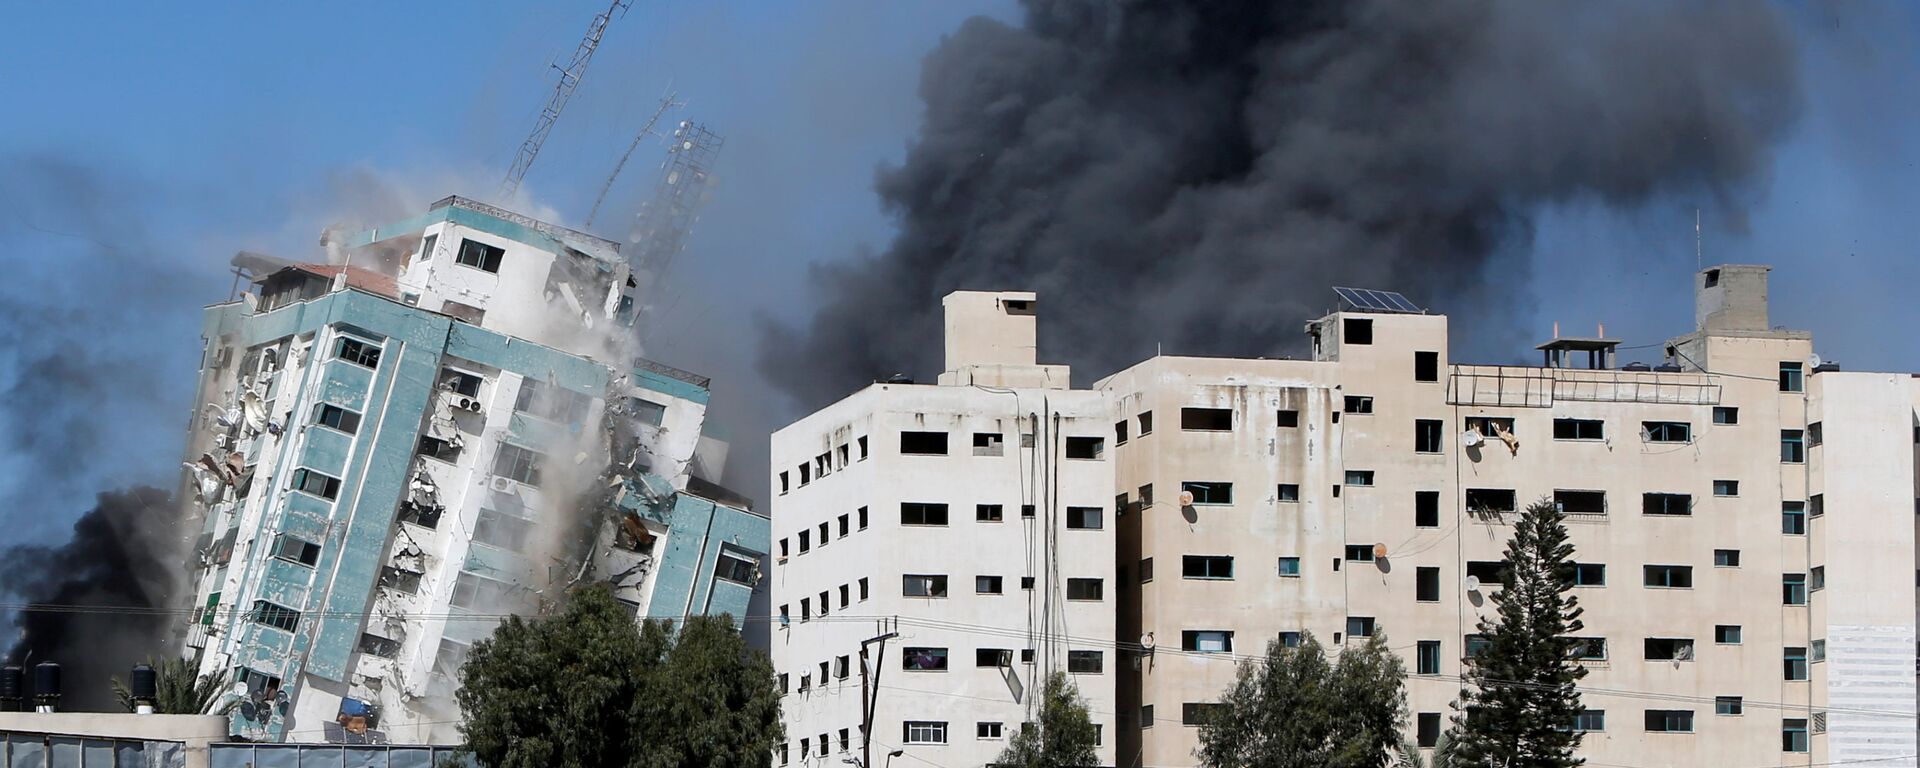 A tower housing AP, Al Jazeera offices collapses after Israeli missile strikes in Gaza city, May 15, 2021.  - Sputnik International, 1920, 25.10.2021